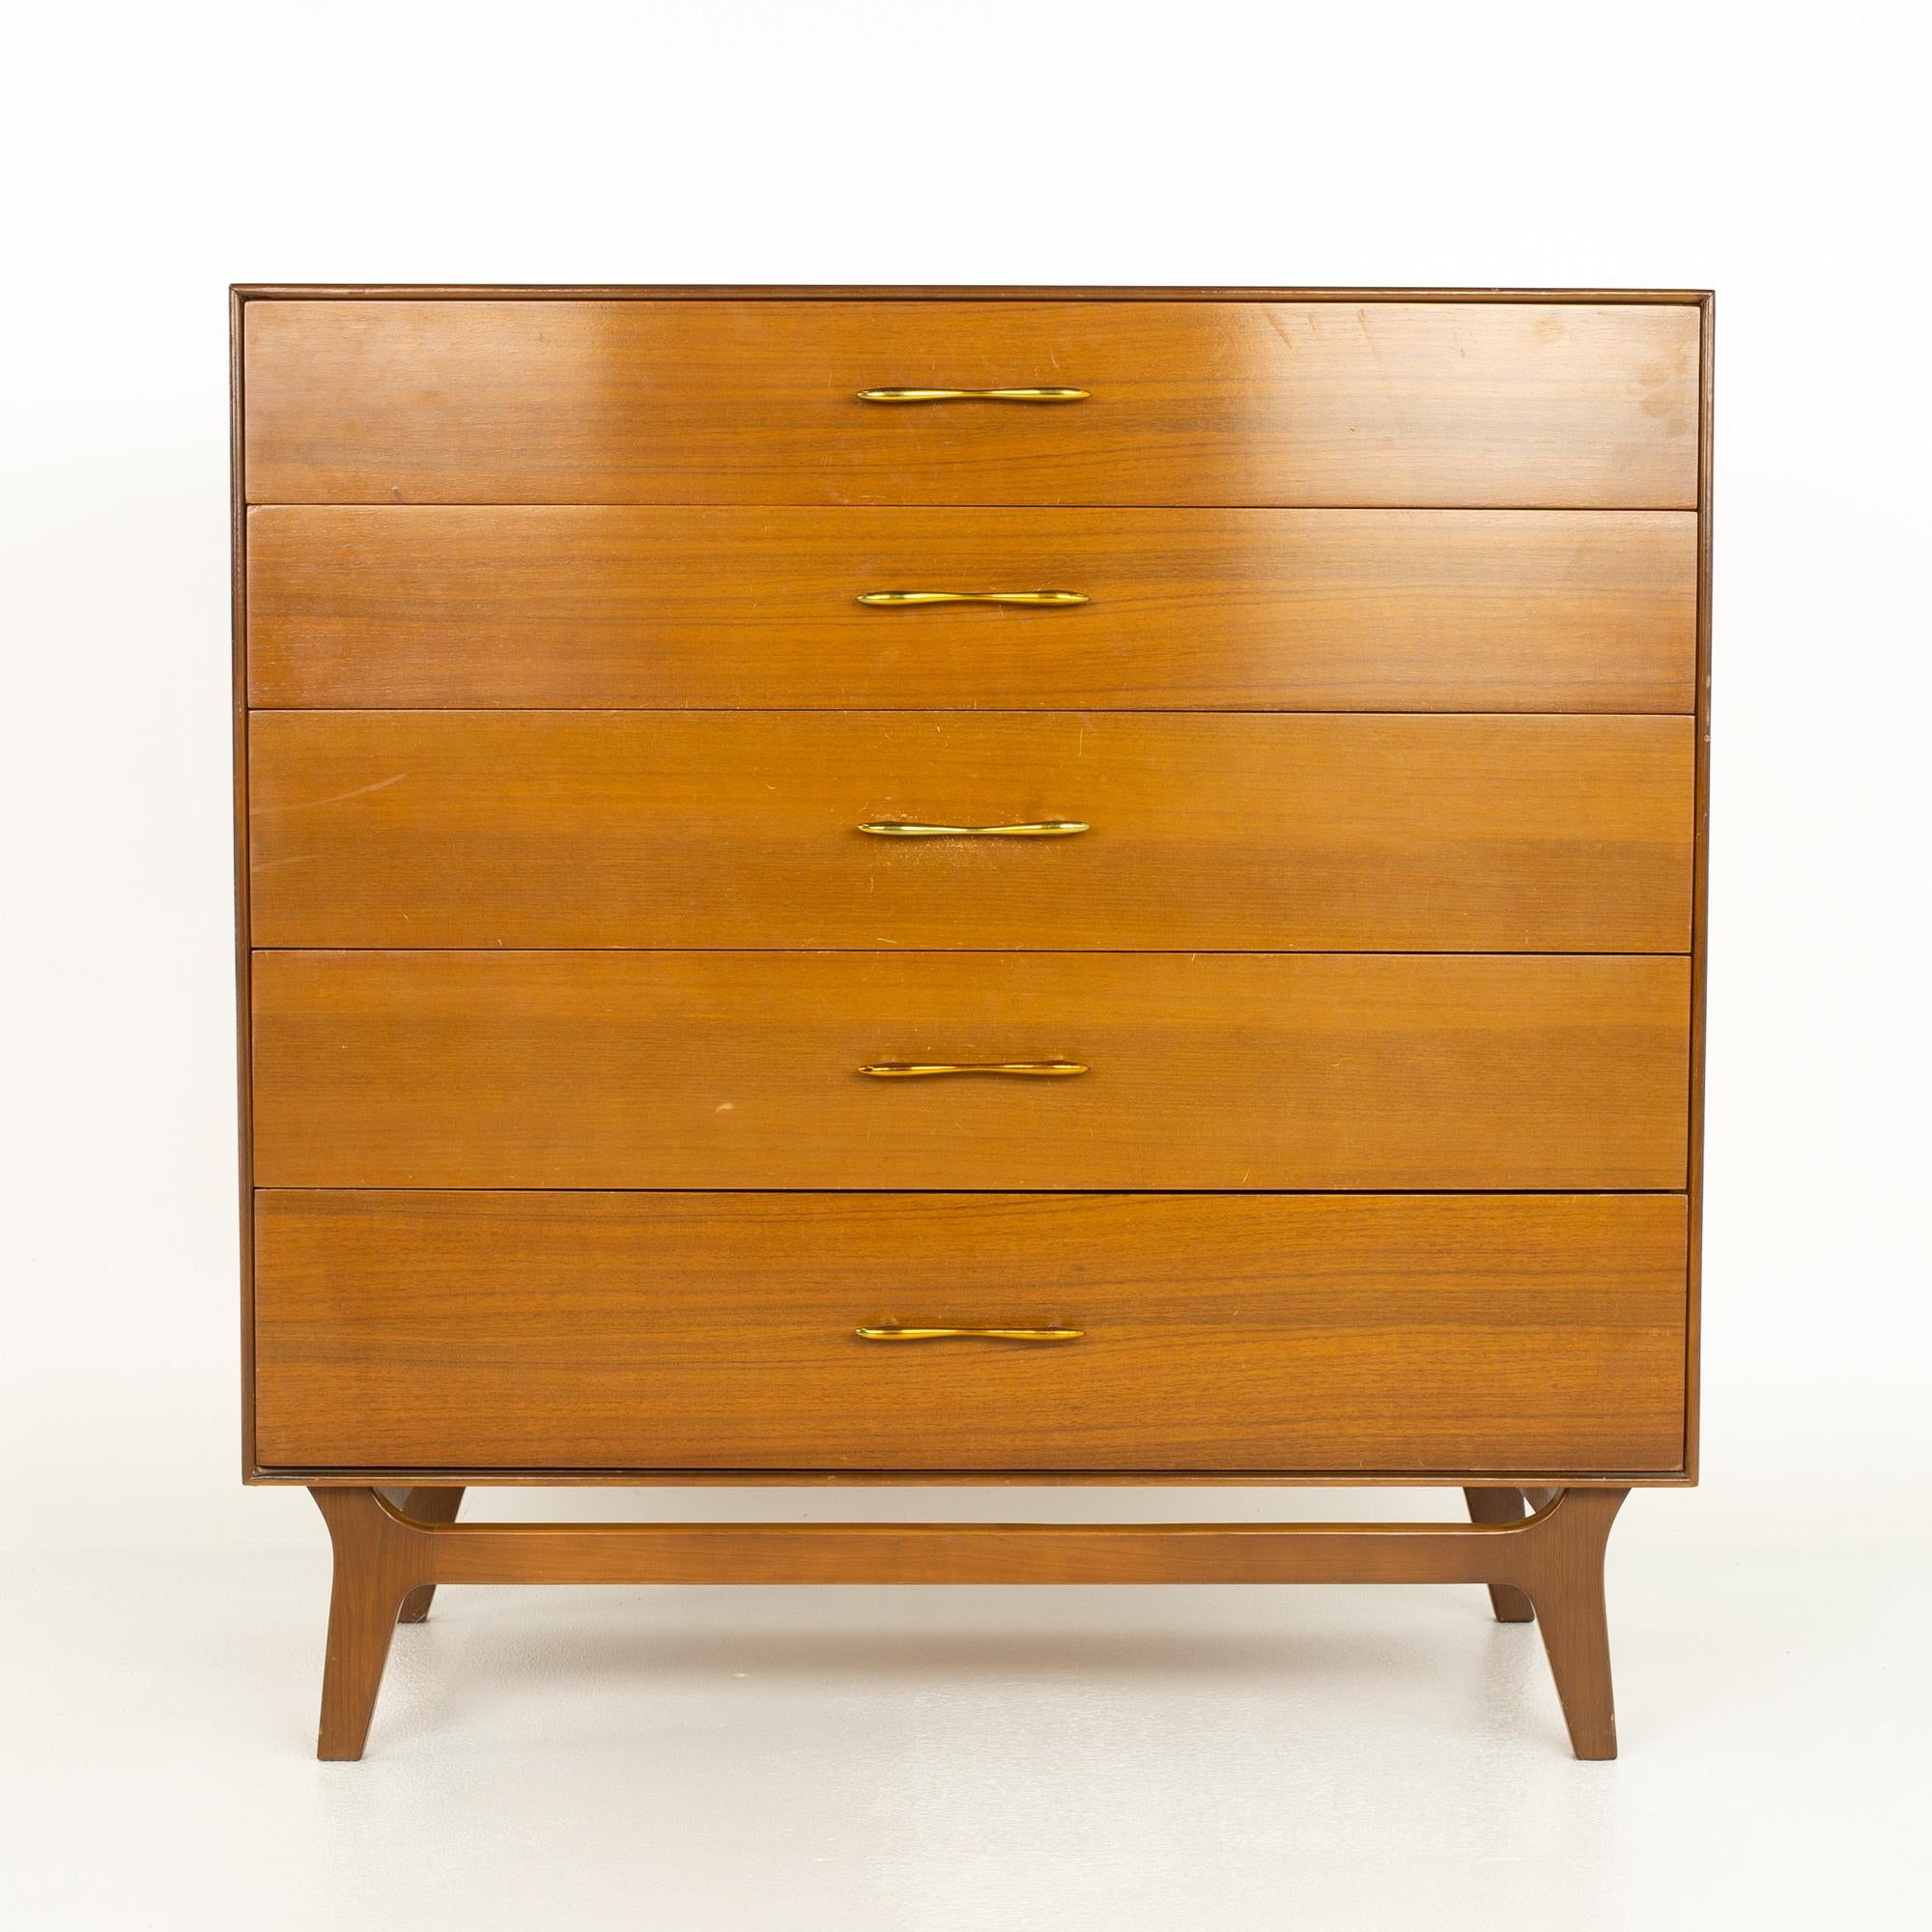 Rway Mid Century 5 Drawer Walnut and Brass Highboy Dresser

This dresser measures: 40 wide x 18.5 deep x 41 inches high

?All pieces of furniture can be had in what we call restored vintage condition. That means the piece is restored upon purchase